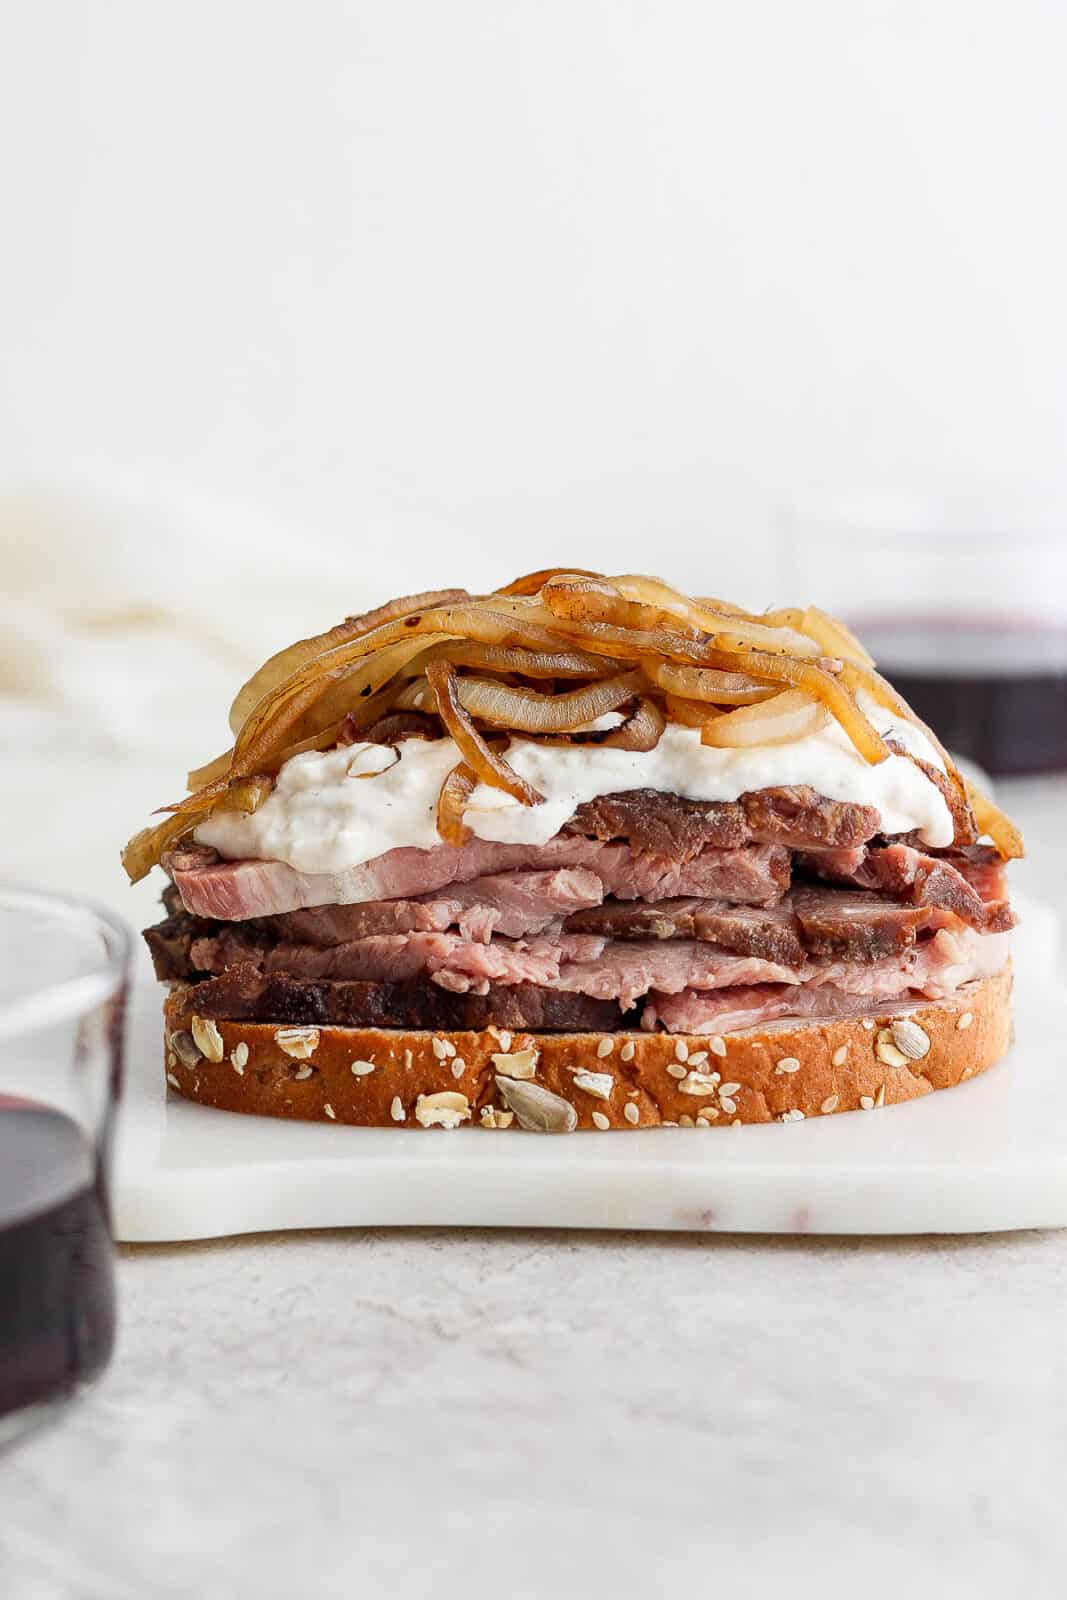 Prime rib, horseradish sauce, & caramelized onions stacked on a piece of bread.